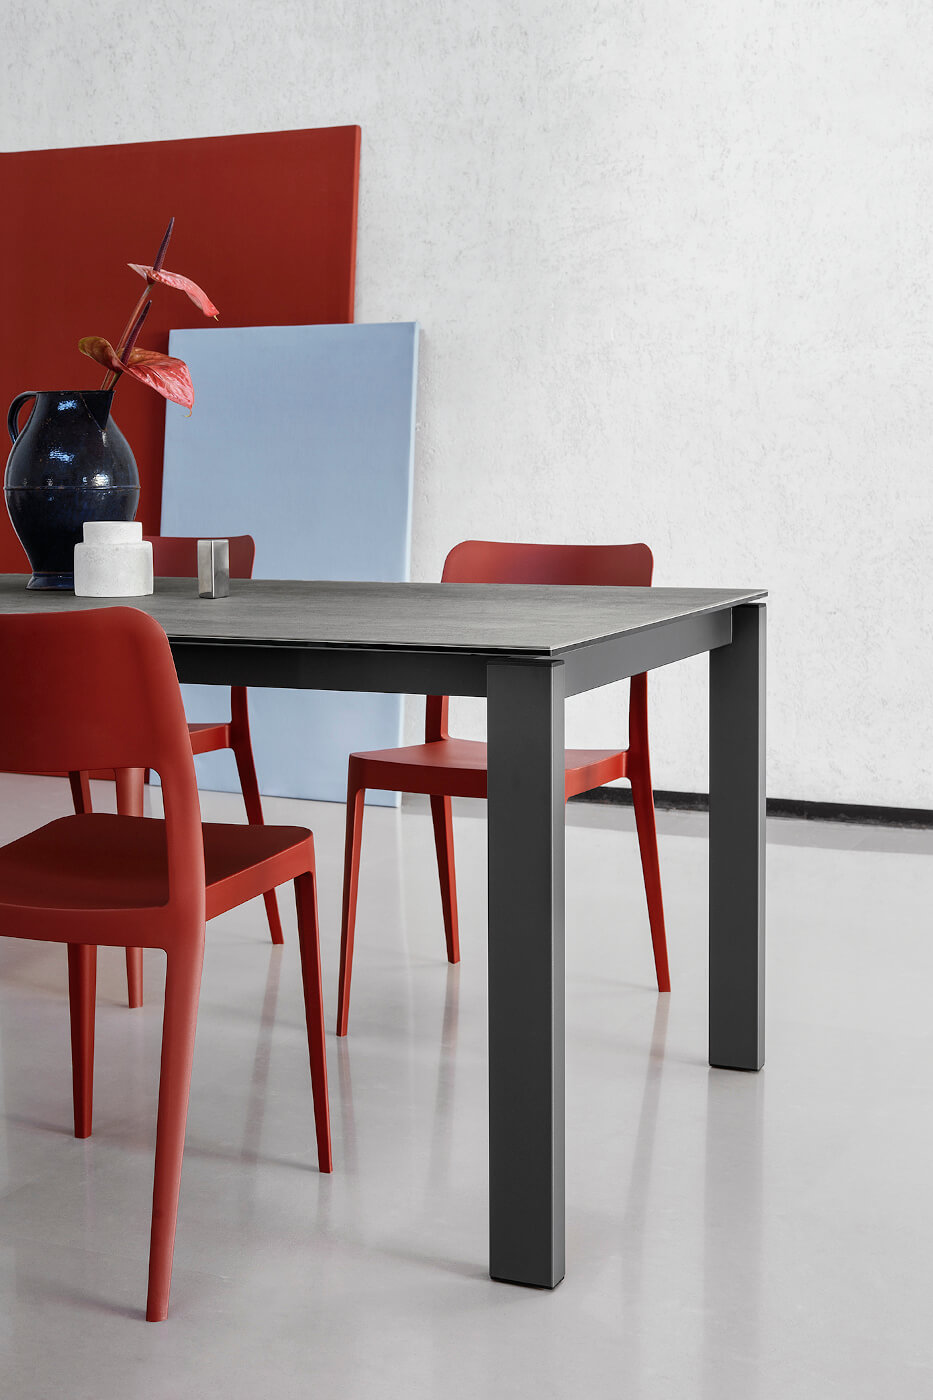 Badù table with steel frame in graphite color and crystalceramic top